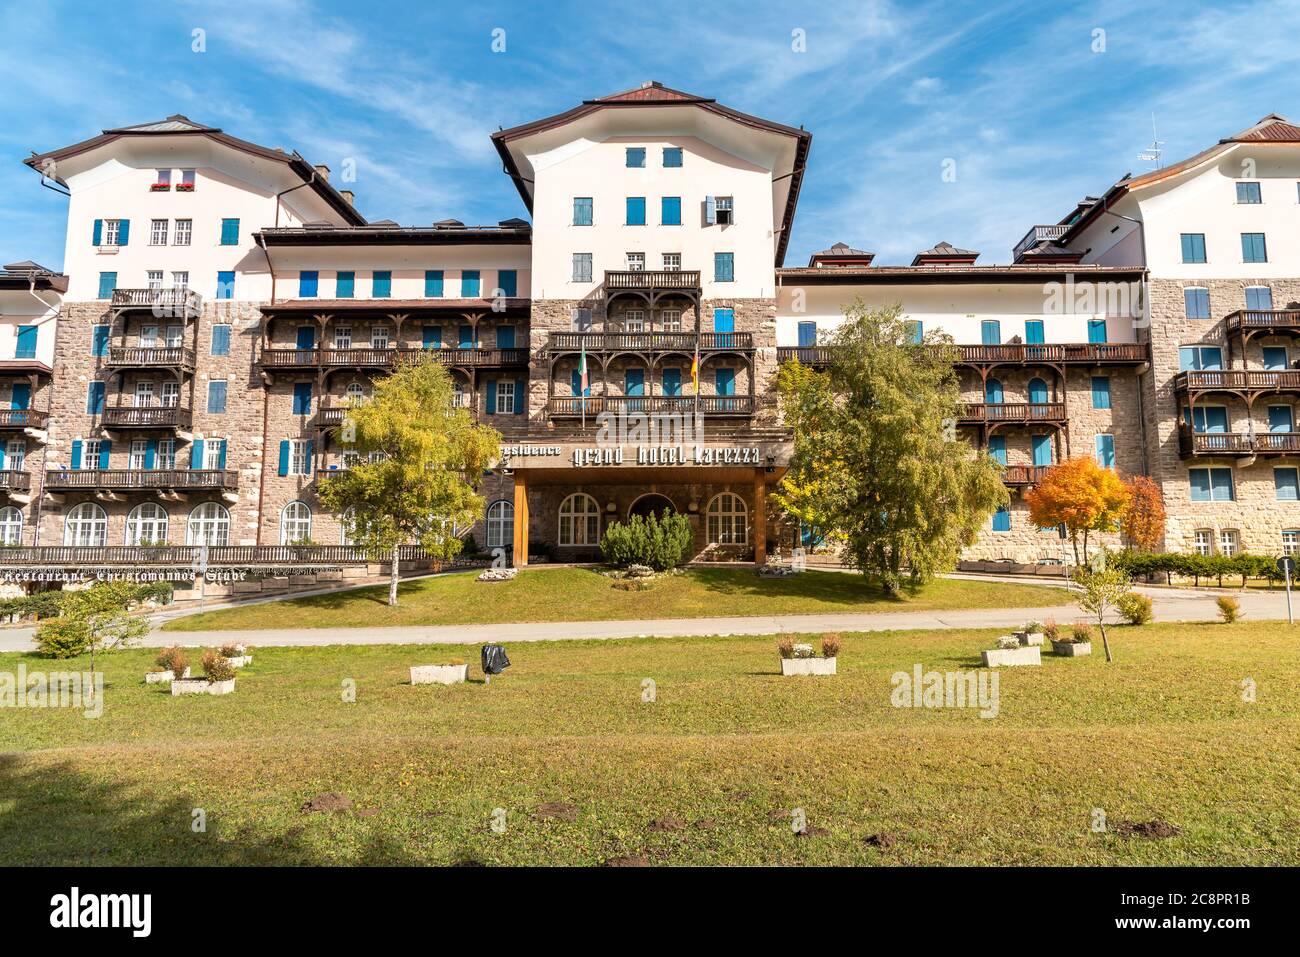 Carezza, South Tyrol, Italy - October 13, 2019: View of Grand Hotel Carezza, is one of the most important Alpine hotels in Dolomites, Italy Stock Photo